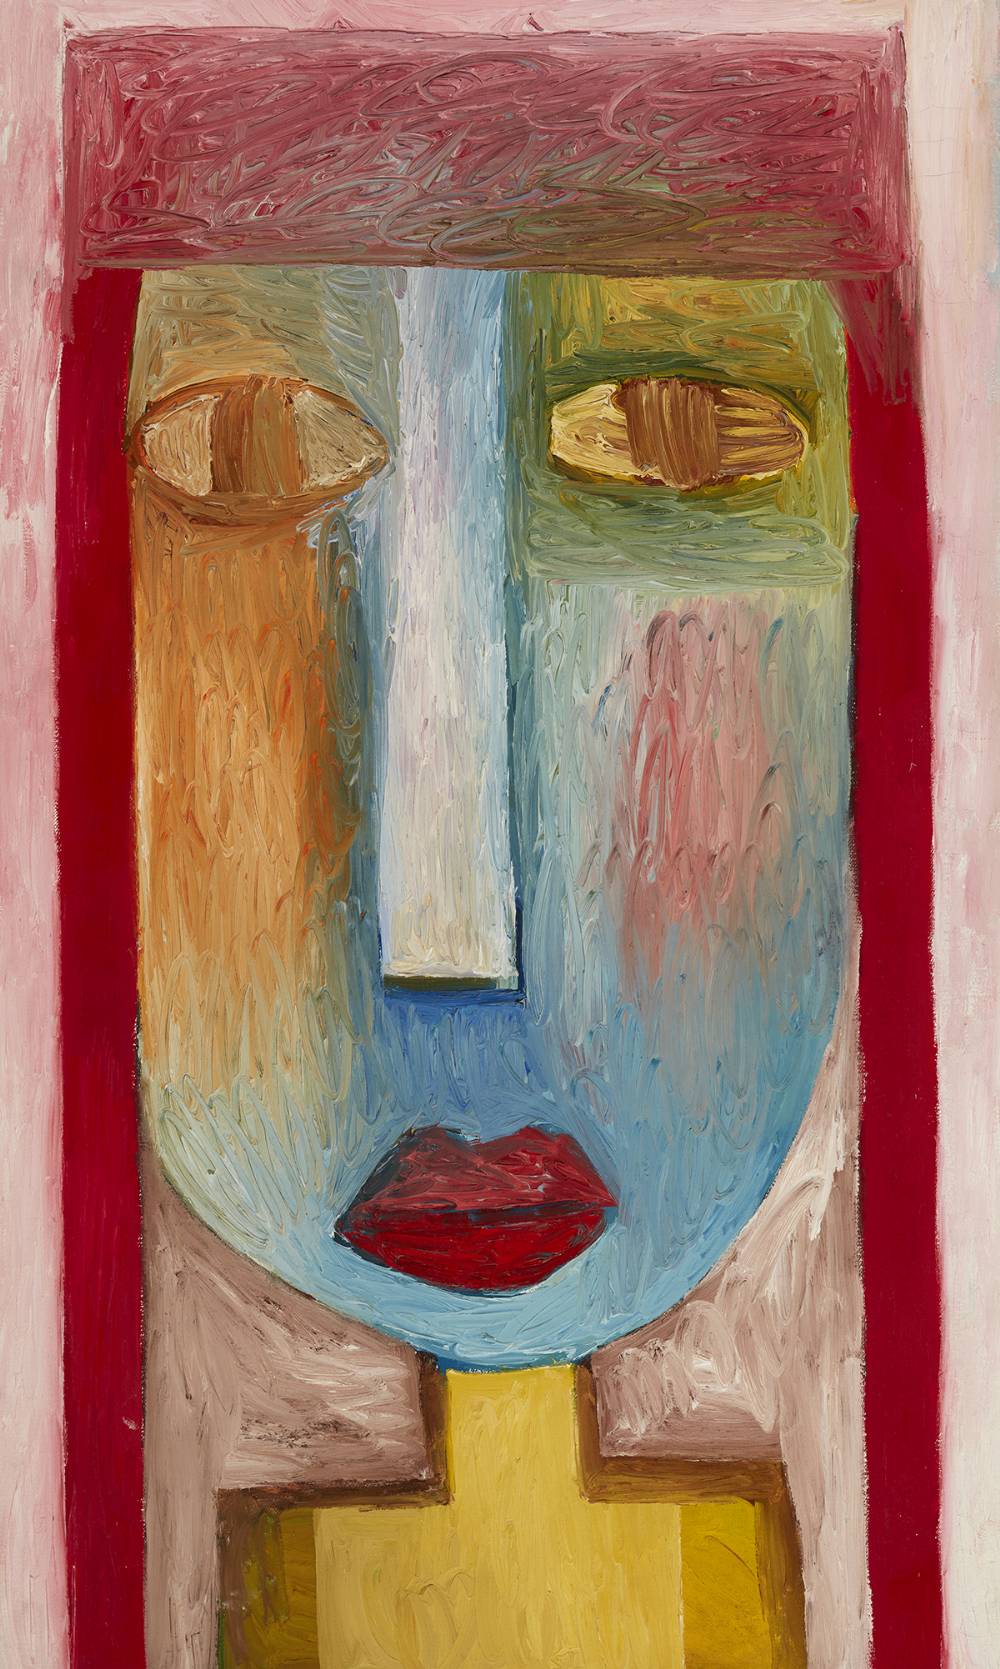 FACE OF A WOMAN by Robert Ryan (b.1963) at Whyte's Auctions